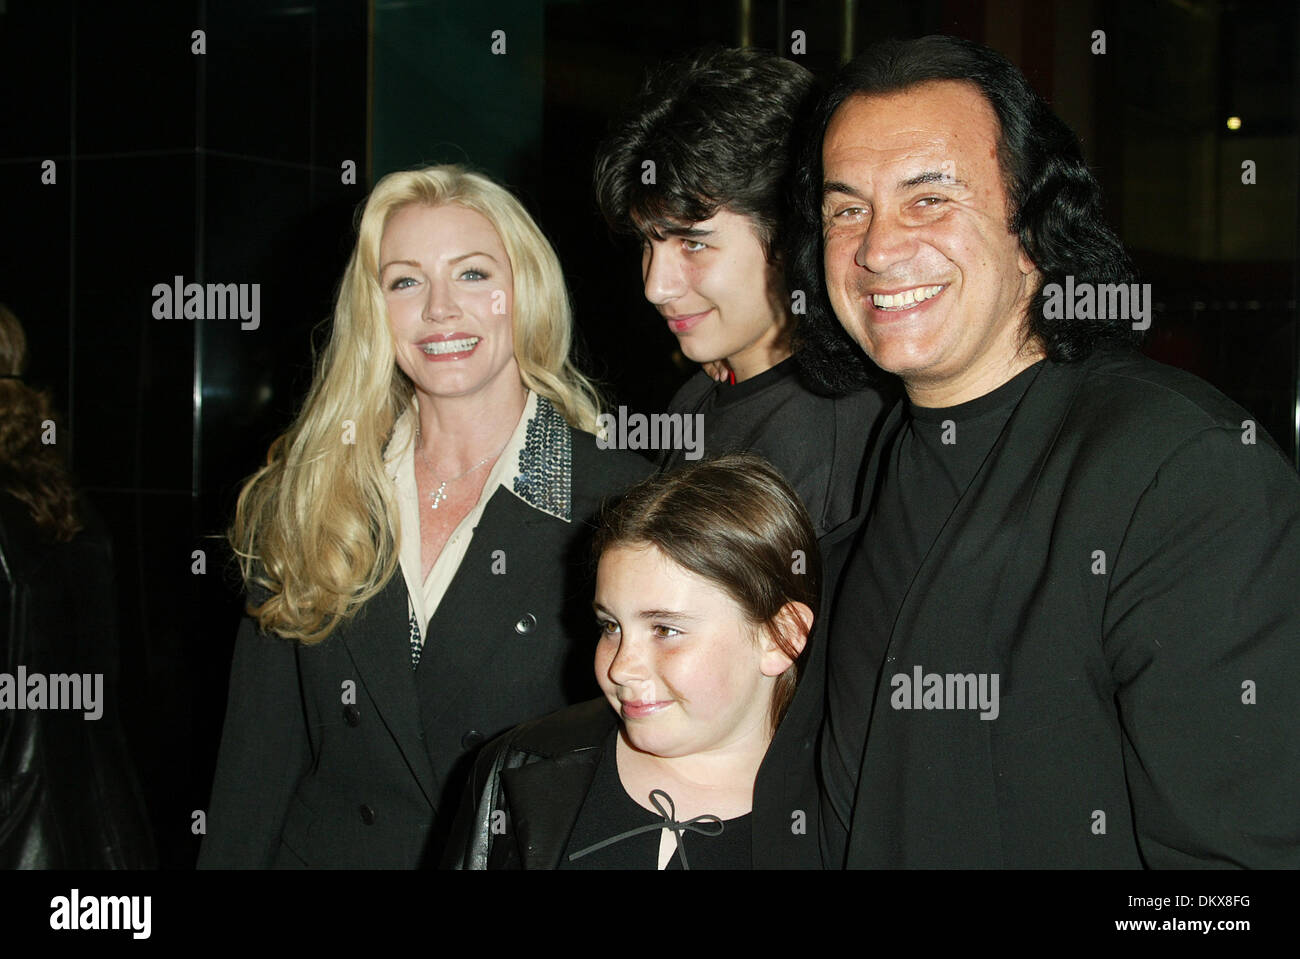 GENE SIMMONS, SHANNON TWEED.WITH KIDS, NICHOLAS & SOPHIE.WOOD, LOS ANGELES, USA.MANNS CHINESE 6 THEATRE, HOLLY.07/05/2002.LA3334 Stock Photo